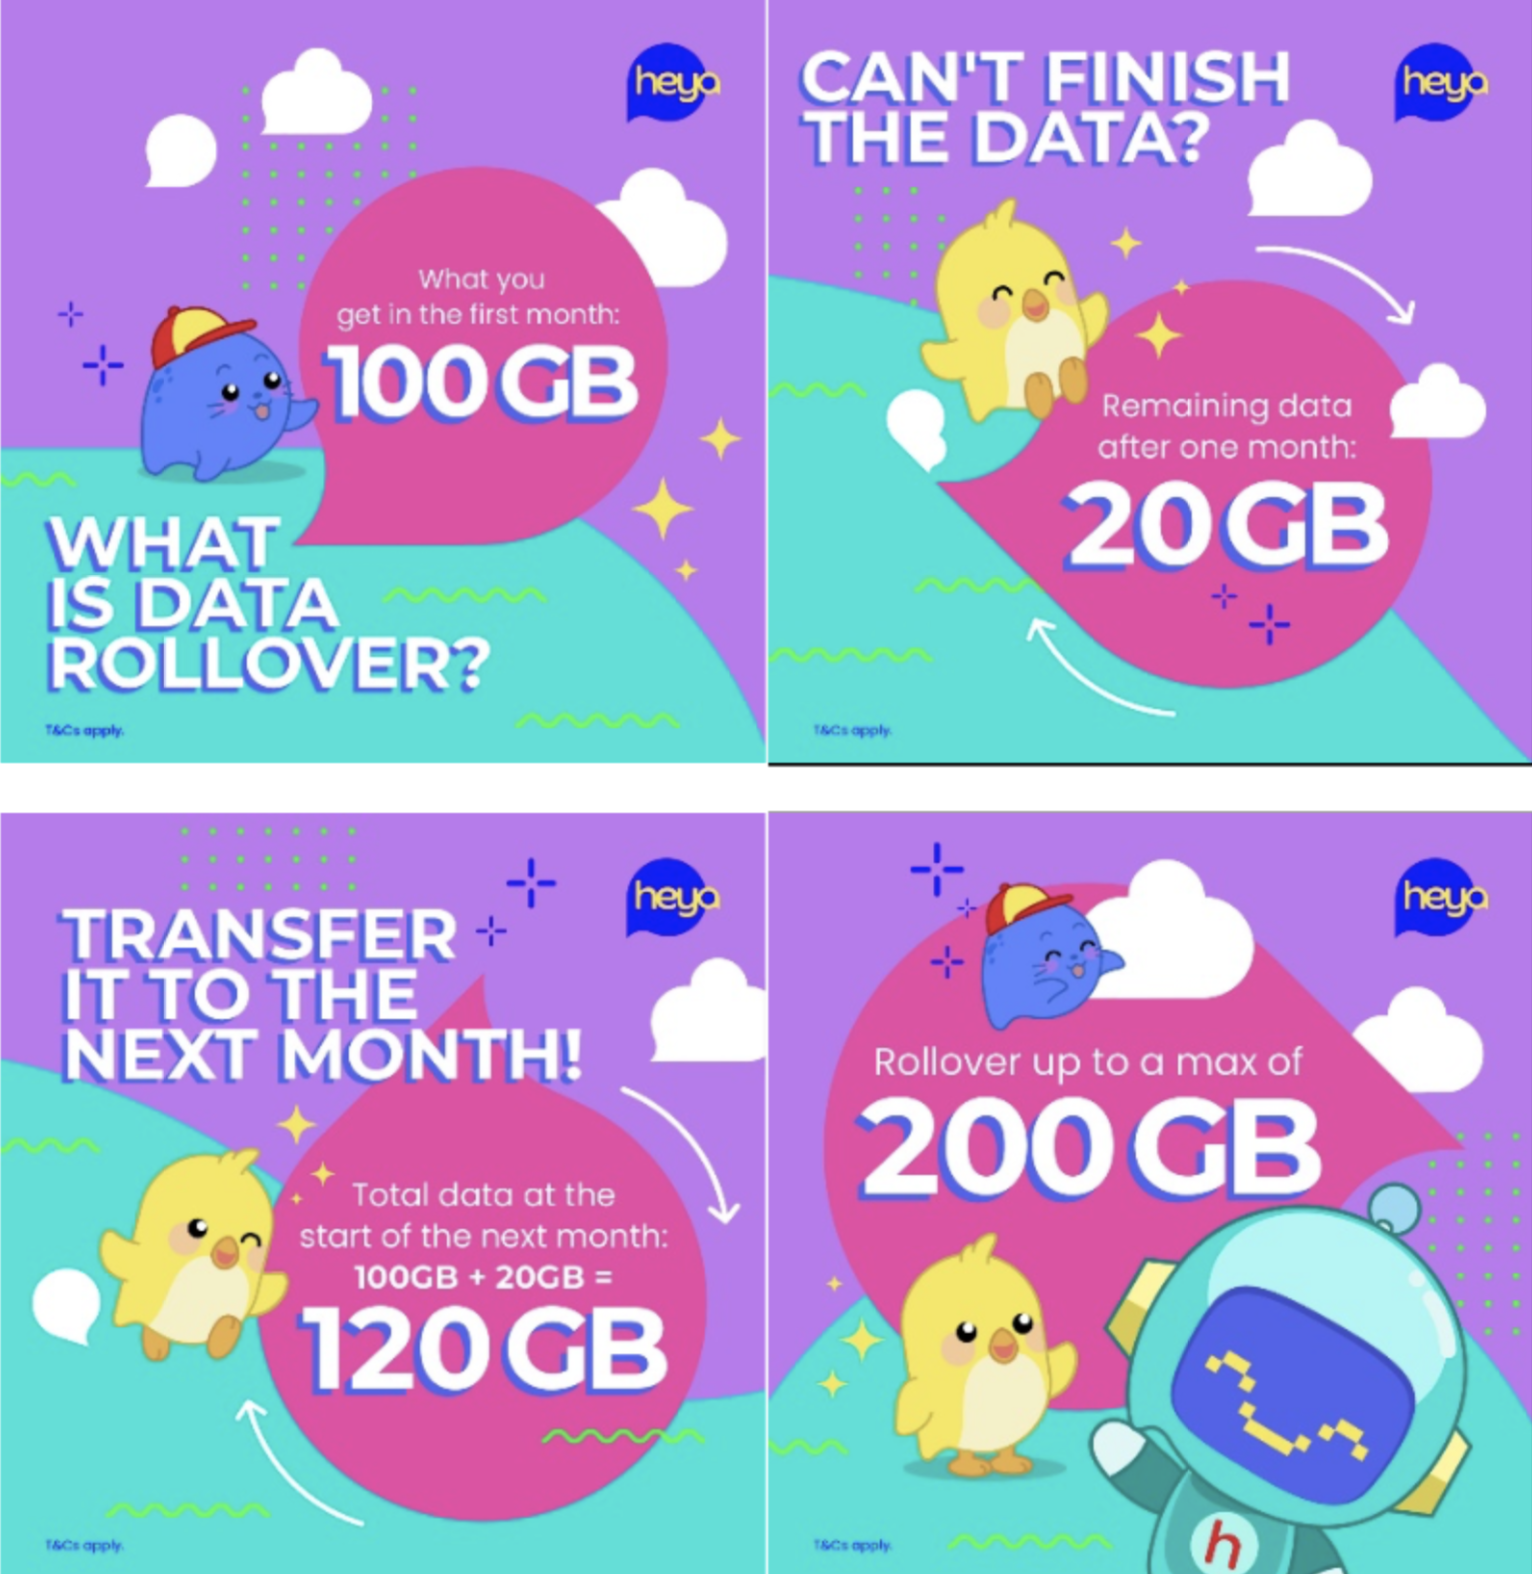 Lobang: Say heya to 100GB, 300 local mins, 500 SMS mobile plan for only $10 - 3